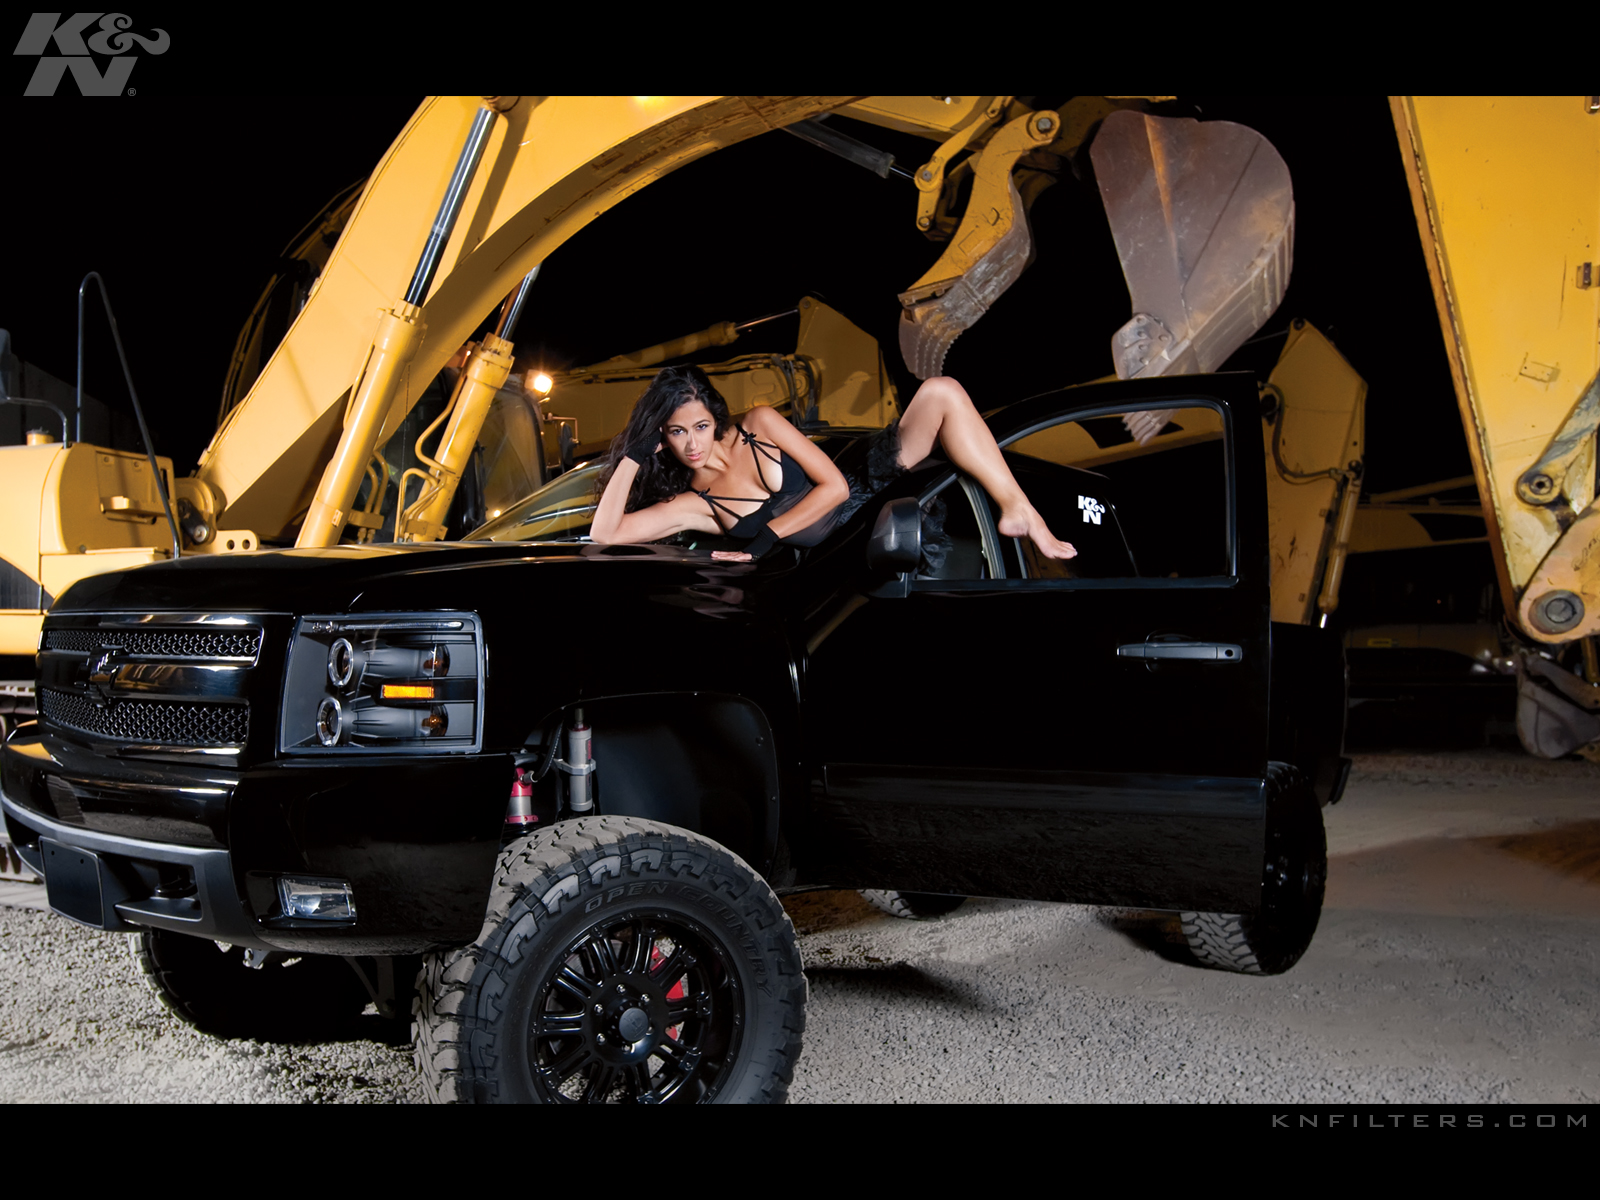 Knfilters News Wallpaper Aspx Lifted Chevy Trucks